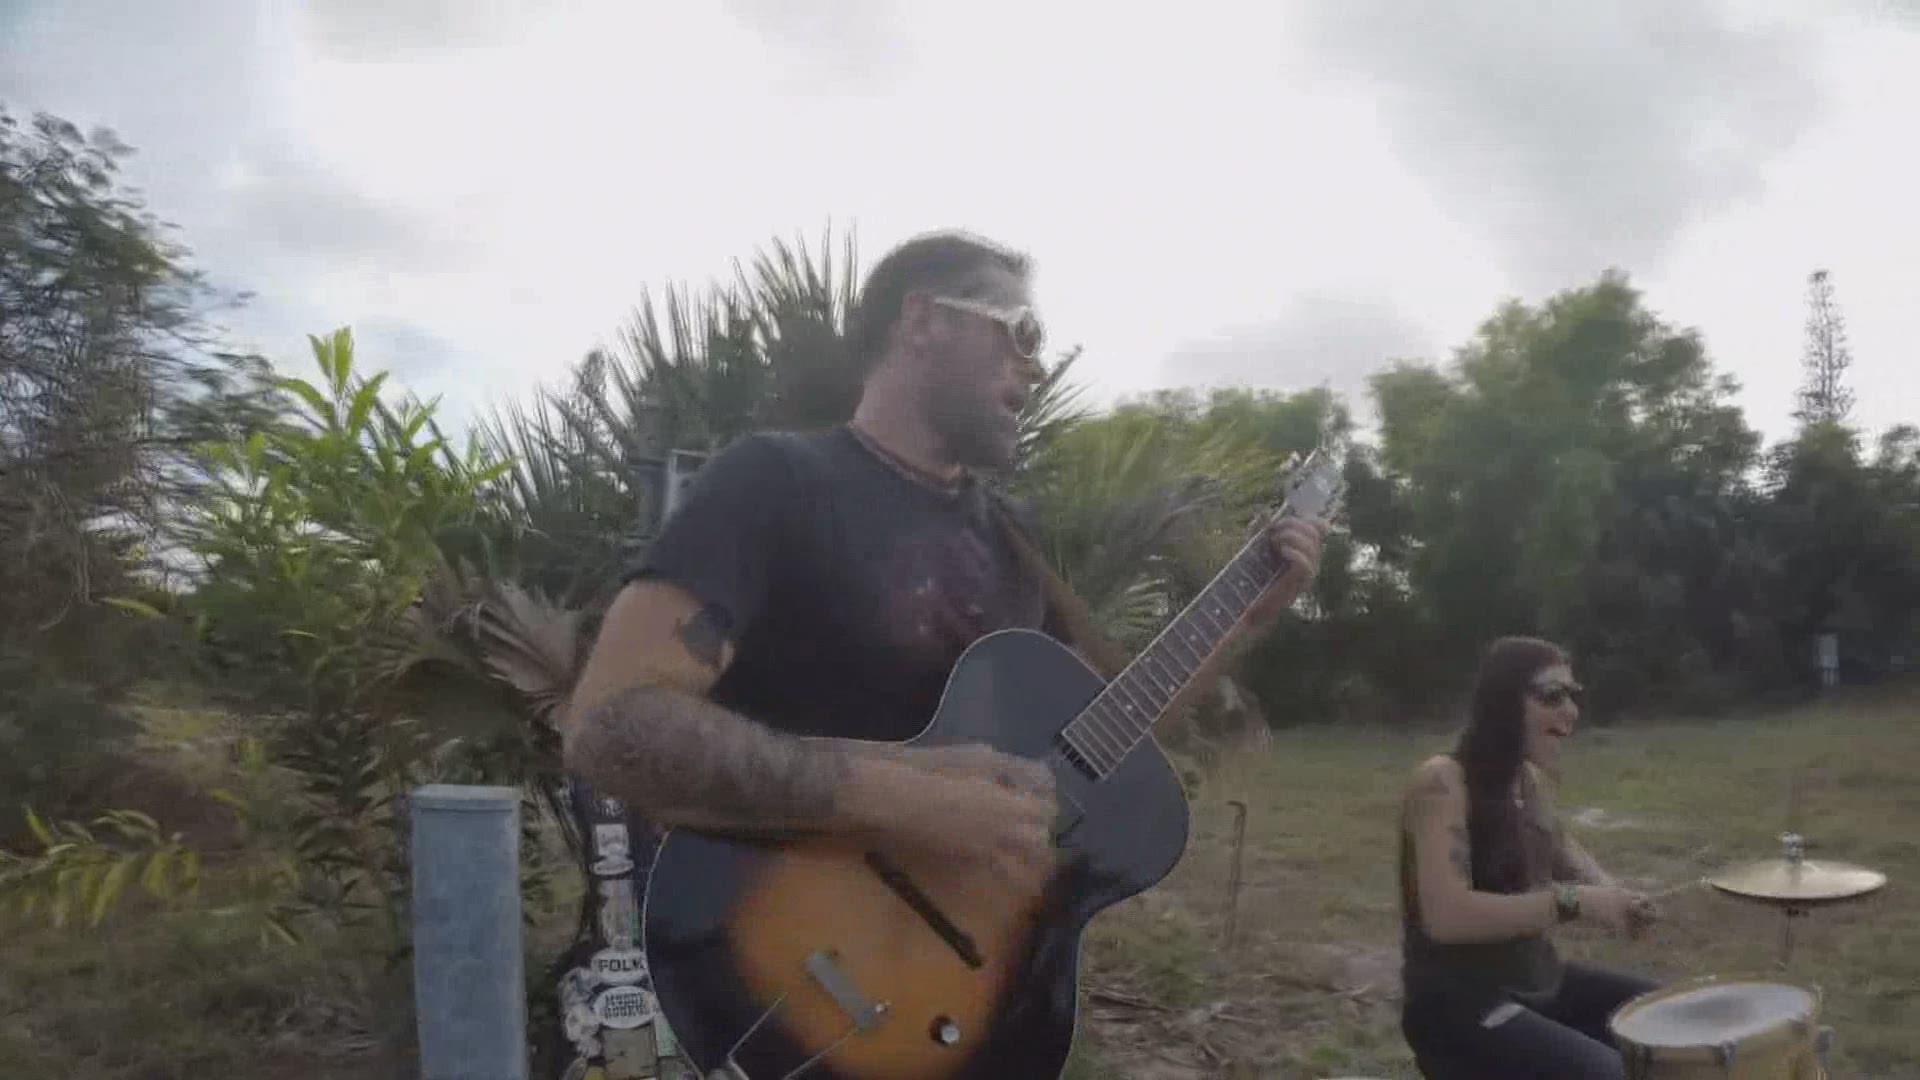 Muddy Ruckus has new music and has put out a new music video for their song "Let Go."